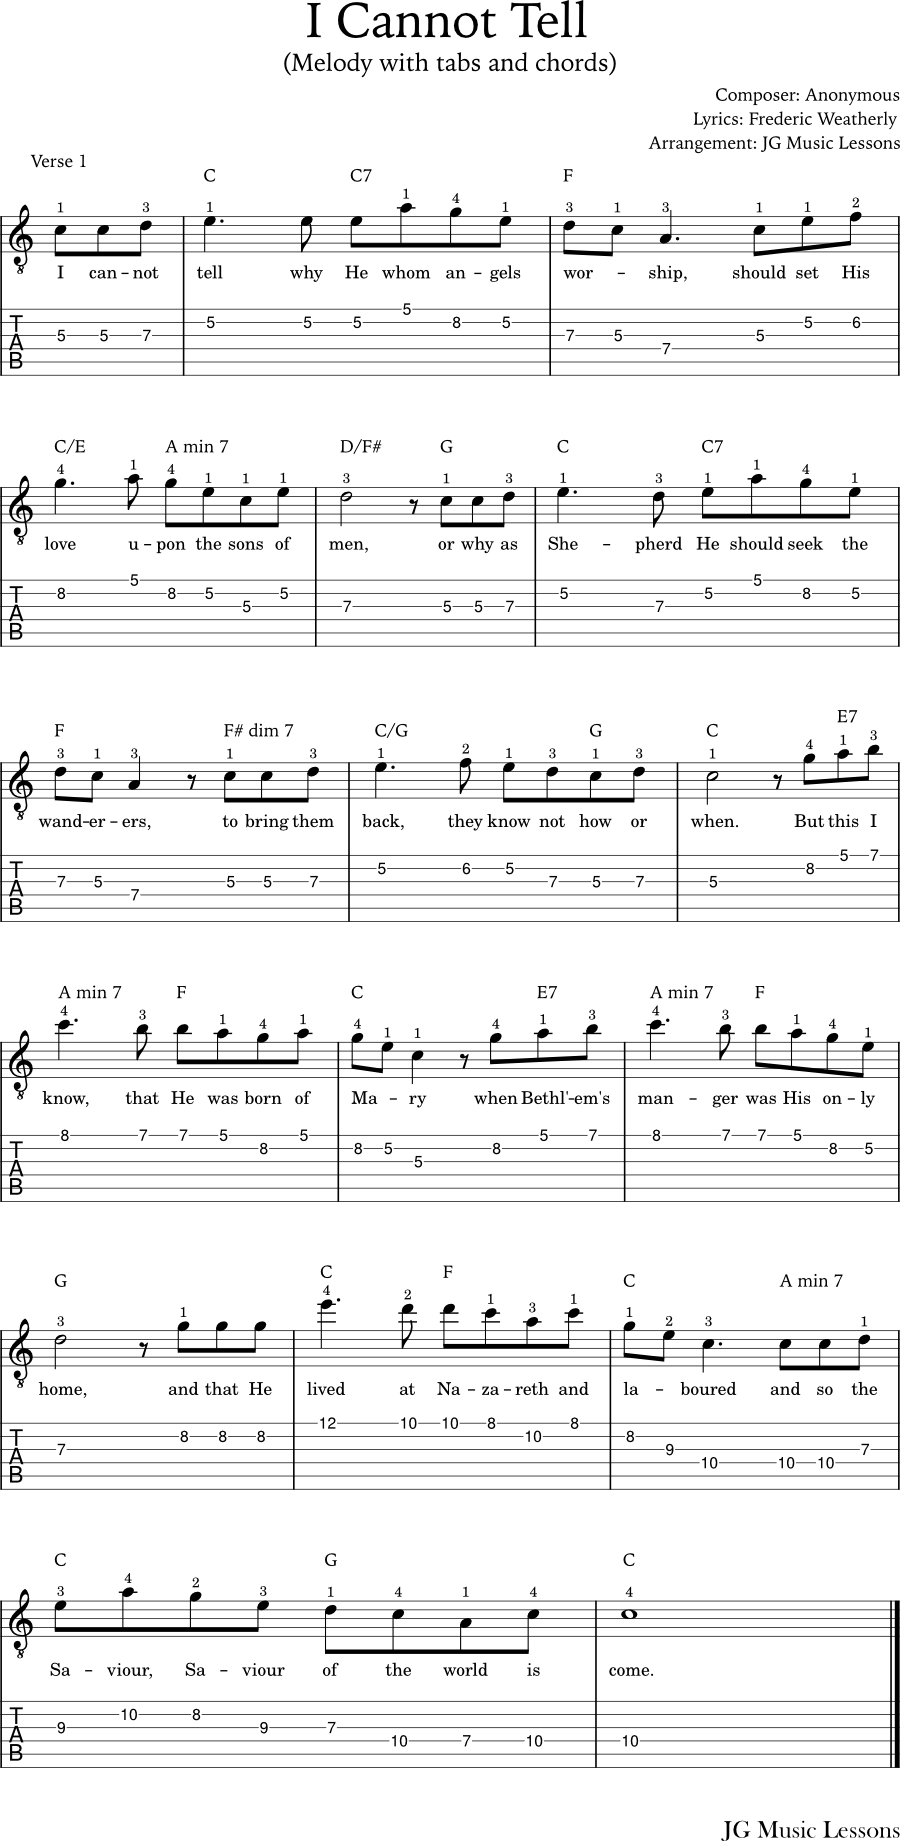 I Cannot Tell melody and chords